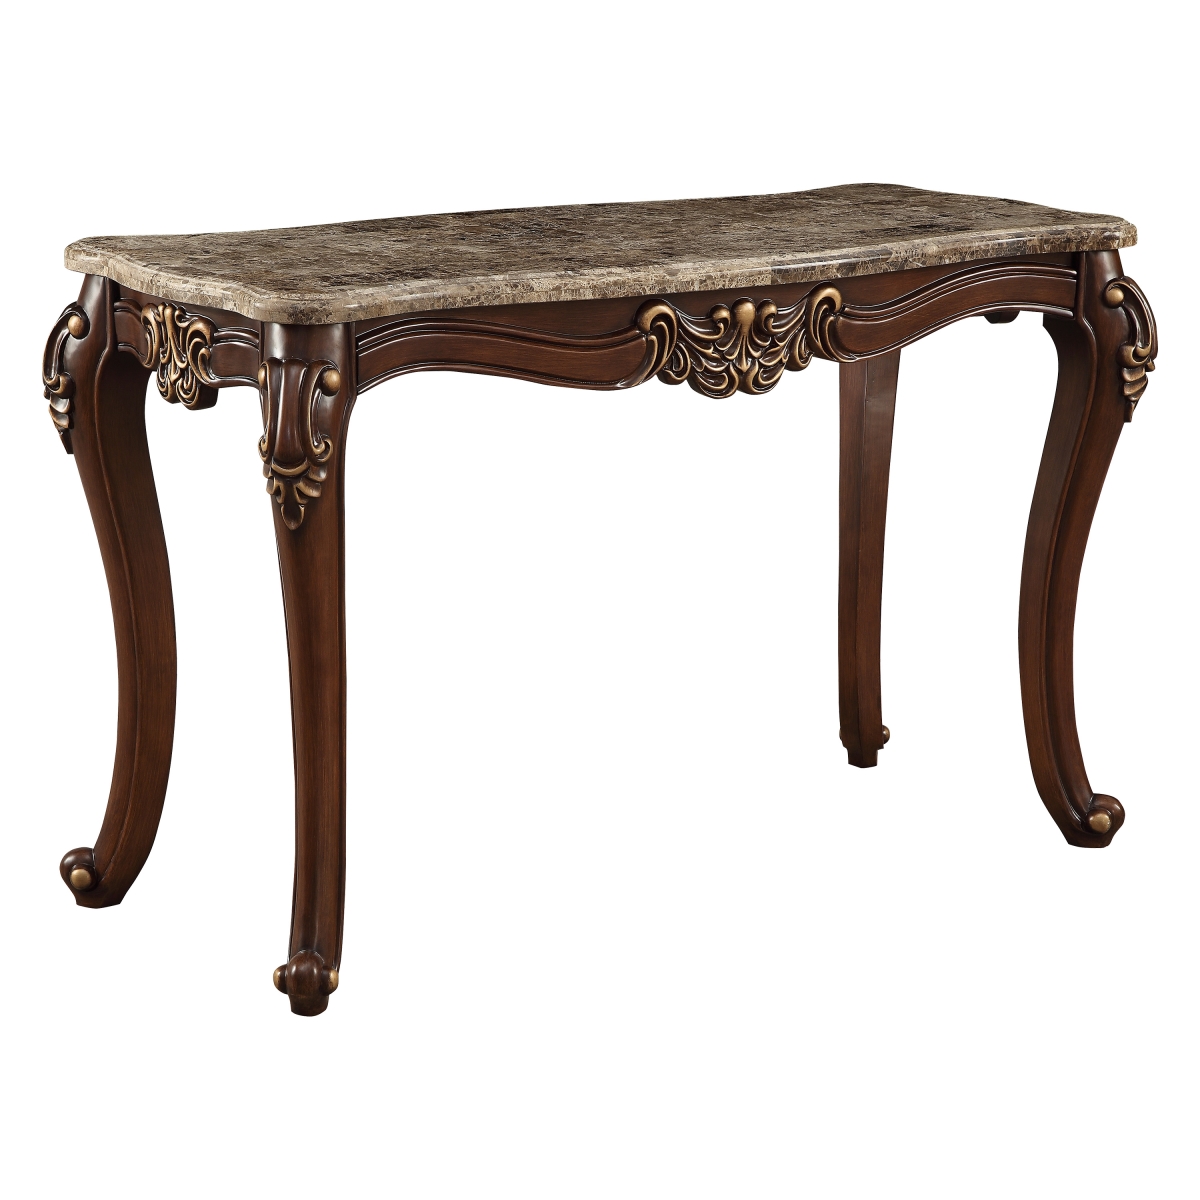 Picture of HomeRoots 347414 23 x 56 x 37 in. Walnut Wood Marble Sofa Table